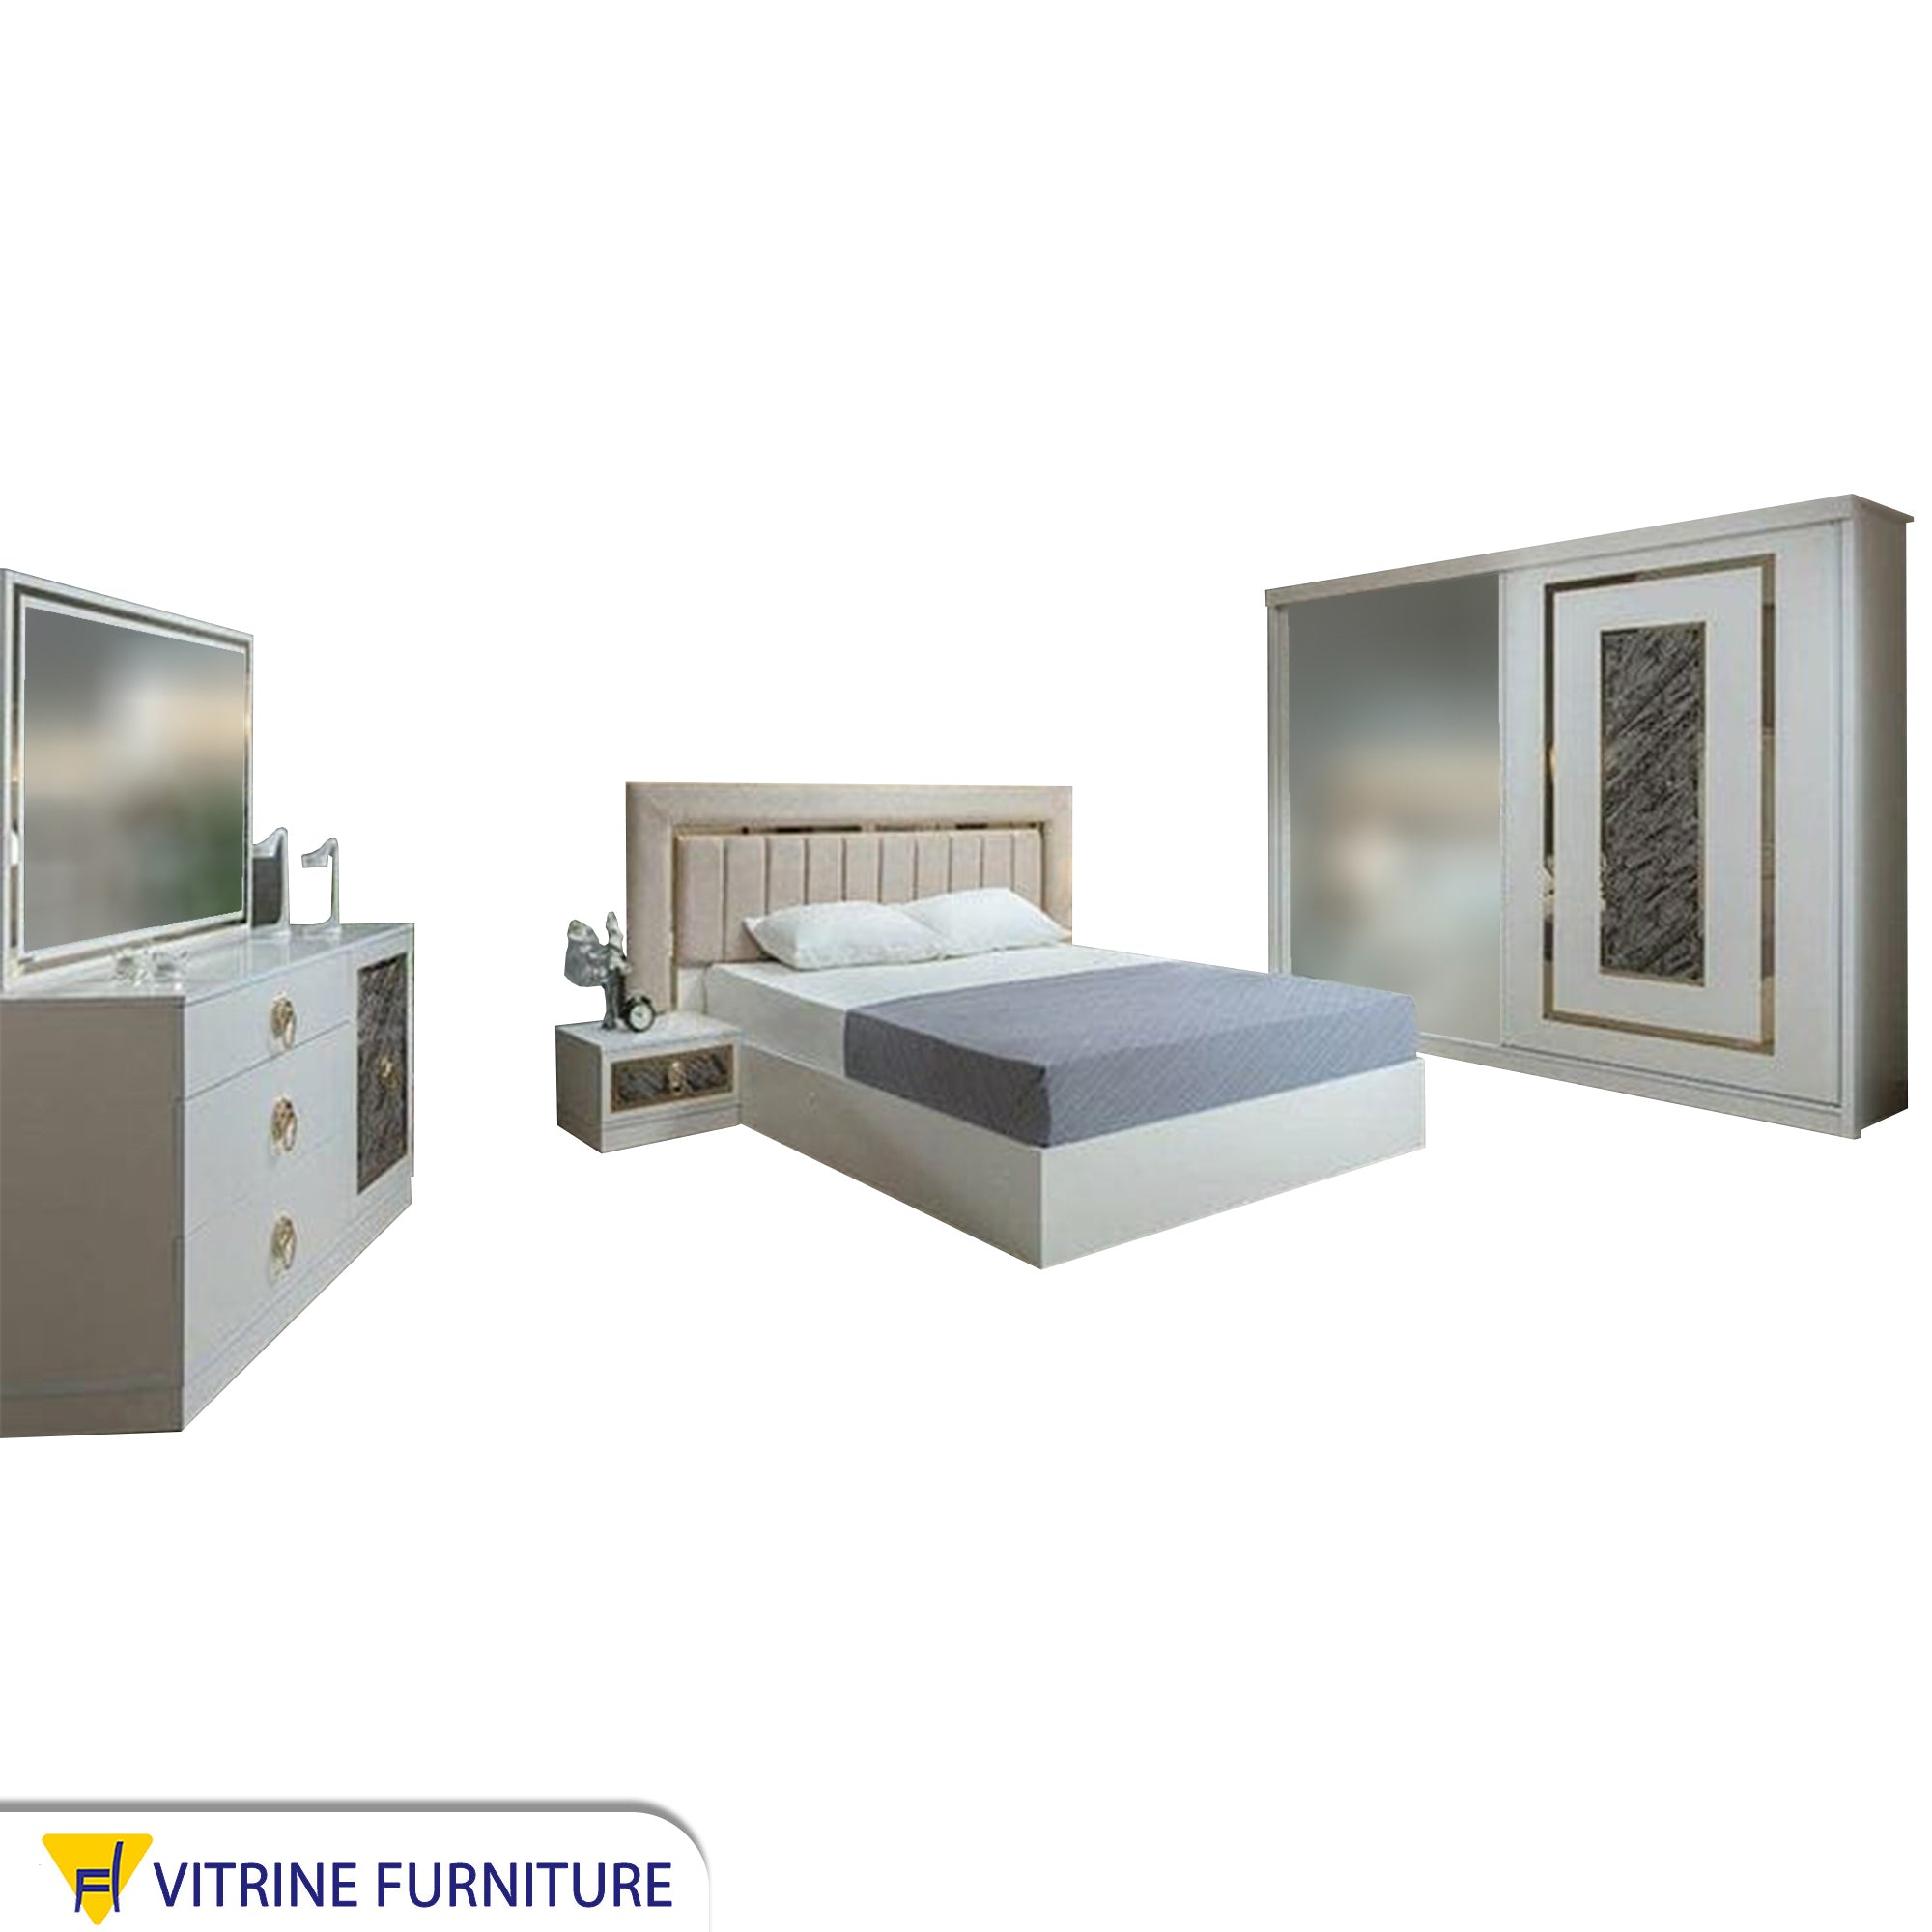 Youth bedroom with capotene upholstery